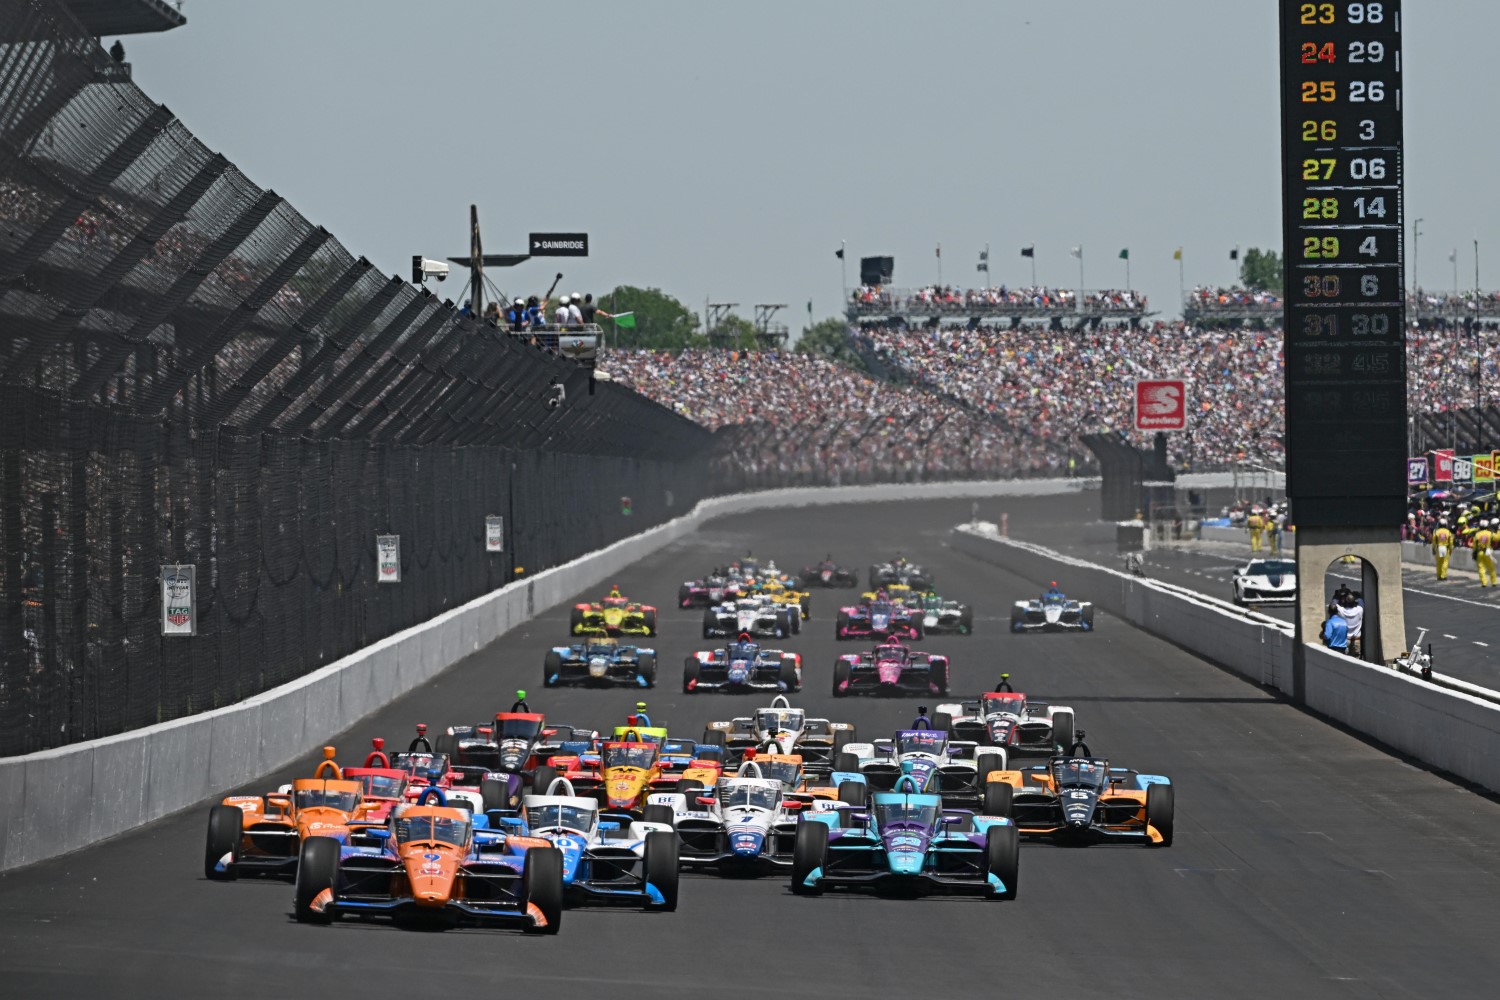 IndyCar Indy 500 Wins ‘Best Motorsports Race’ Award from USA TODAY Readers